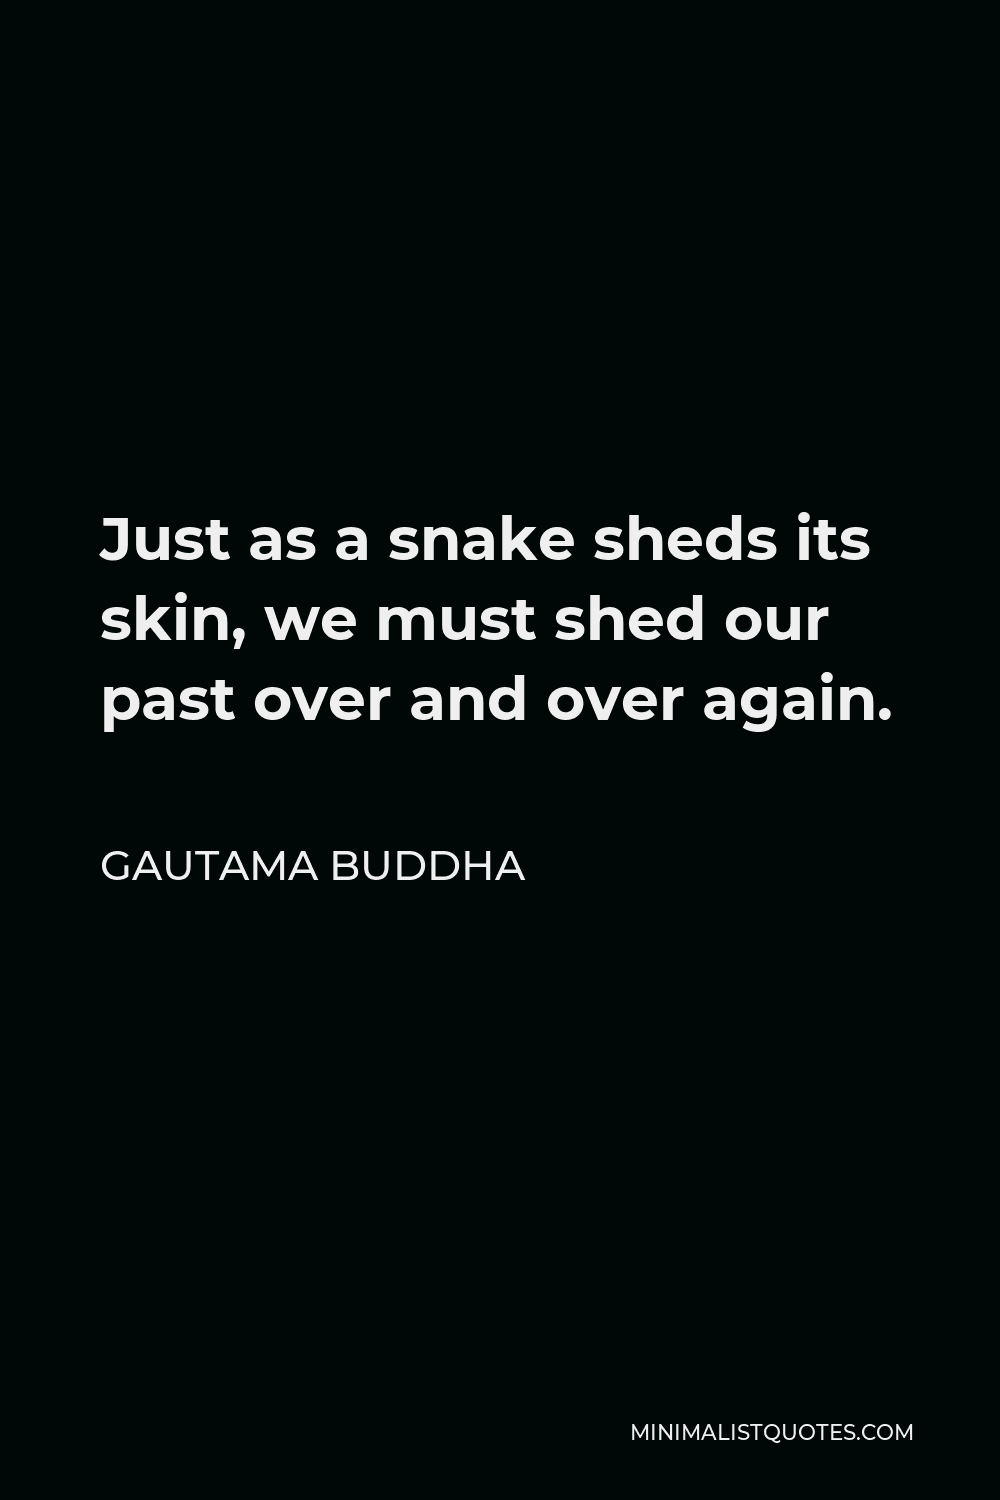 Gautama Buddha Quote - Just as a snake sheds its skin, we must shed our past over and over again.